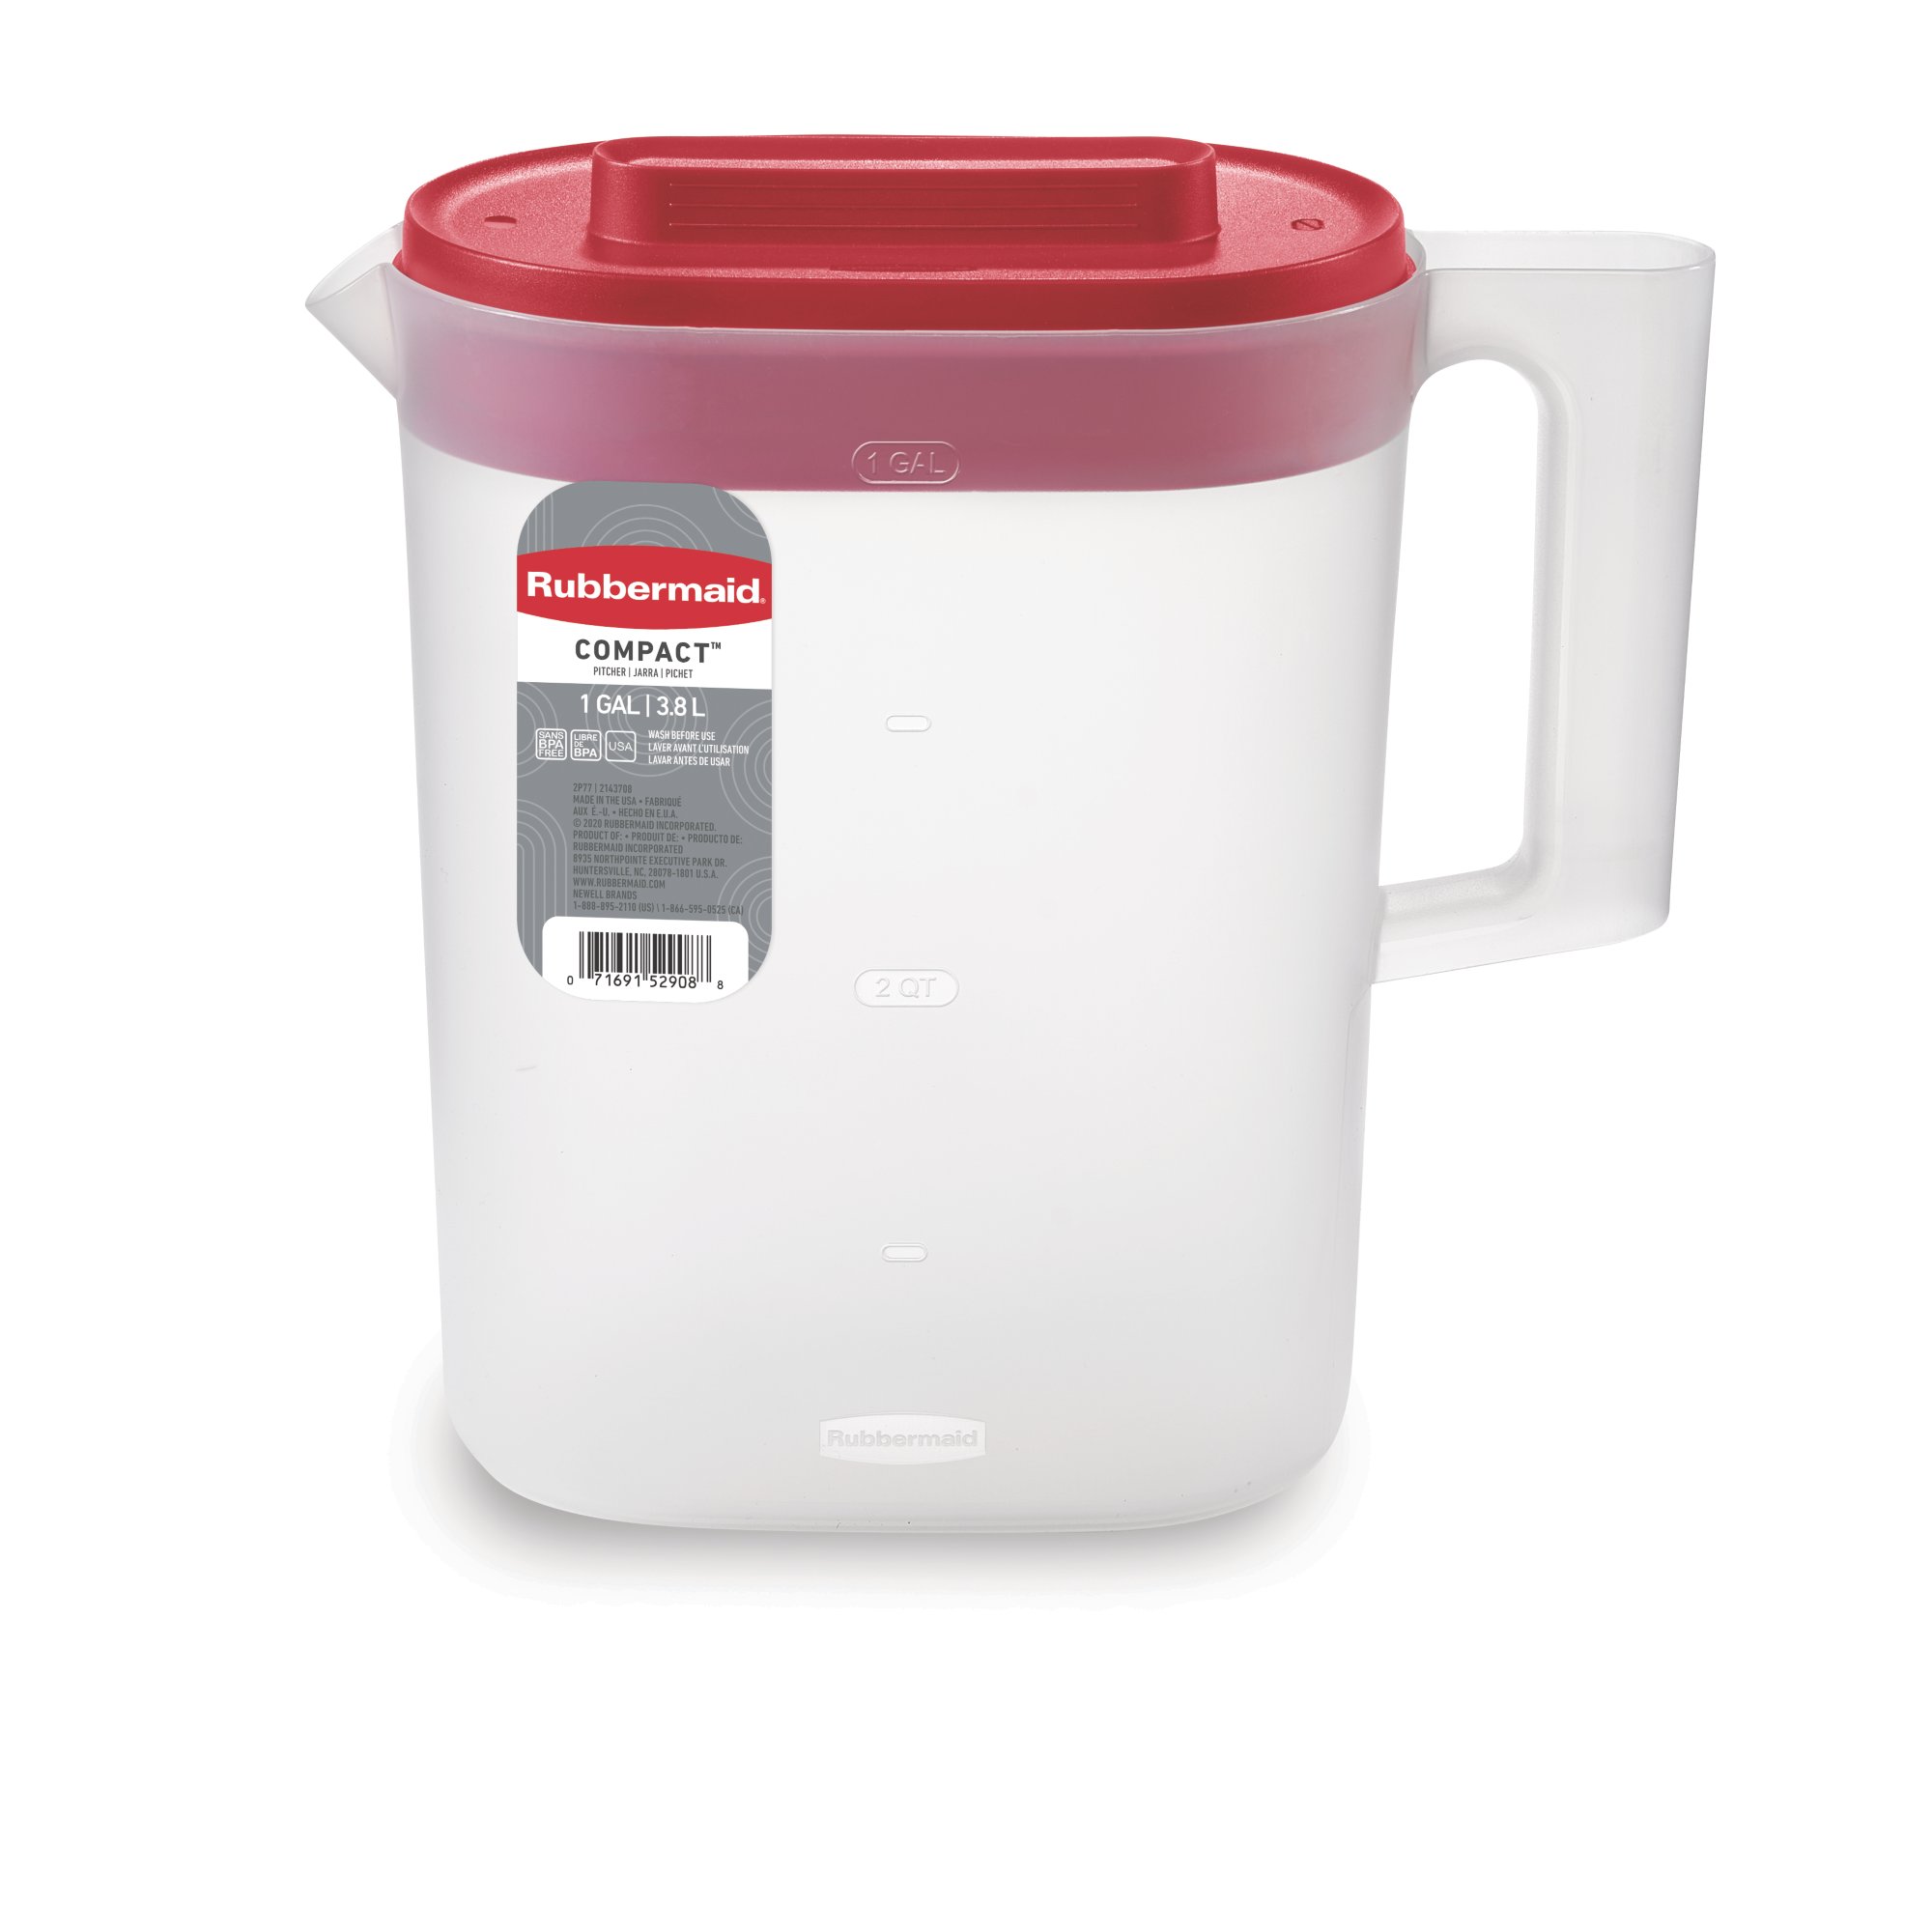 https://s7d9.scene7.com/is/image/NewellRubbermaid/2122602-rubbermaid-food-storage-compact-pitcher-1g-red-in-pack-straight-on?wid=2000&hei=2000